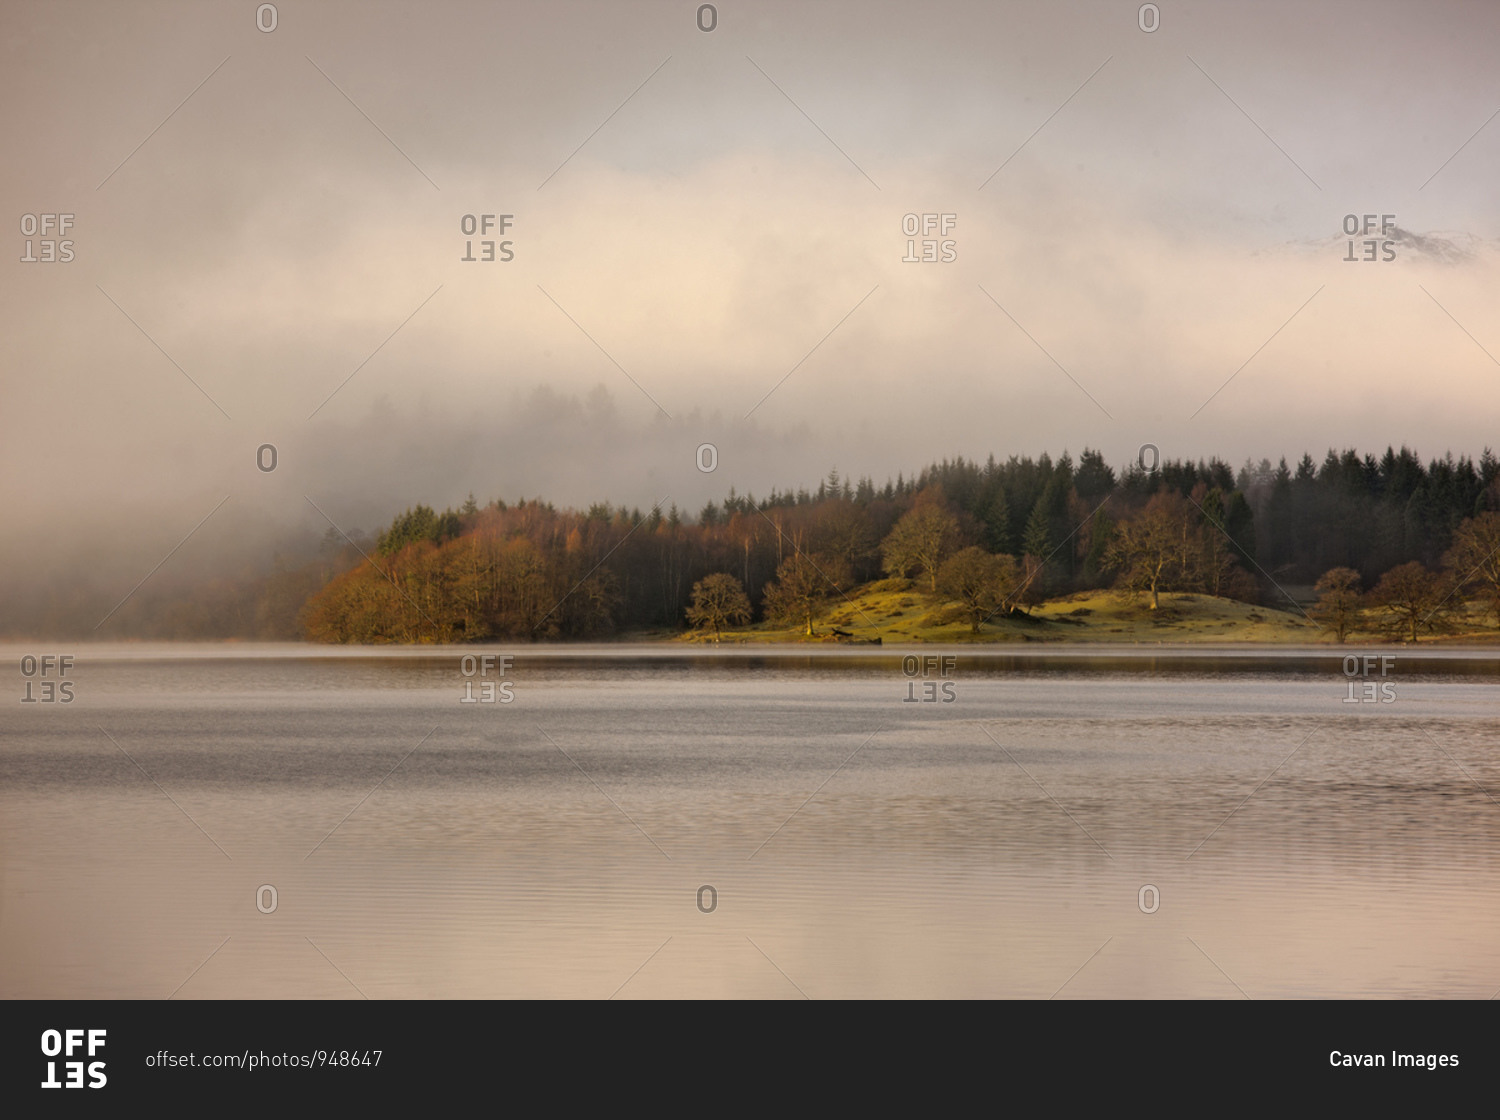 Scenic view of lake Windermere in the British Lake District
stock photo - OFFSET